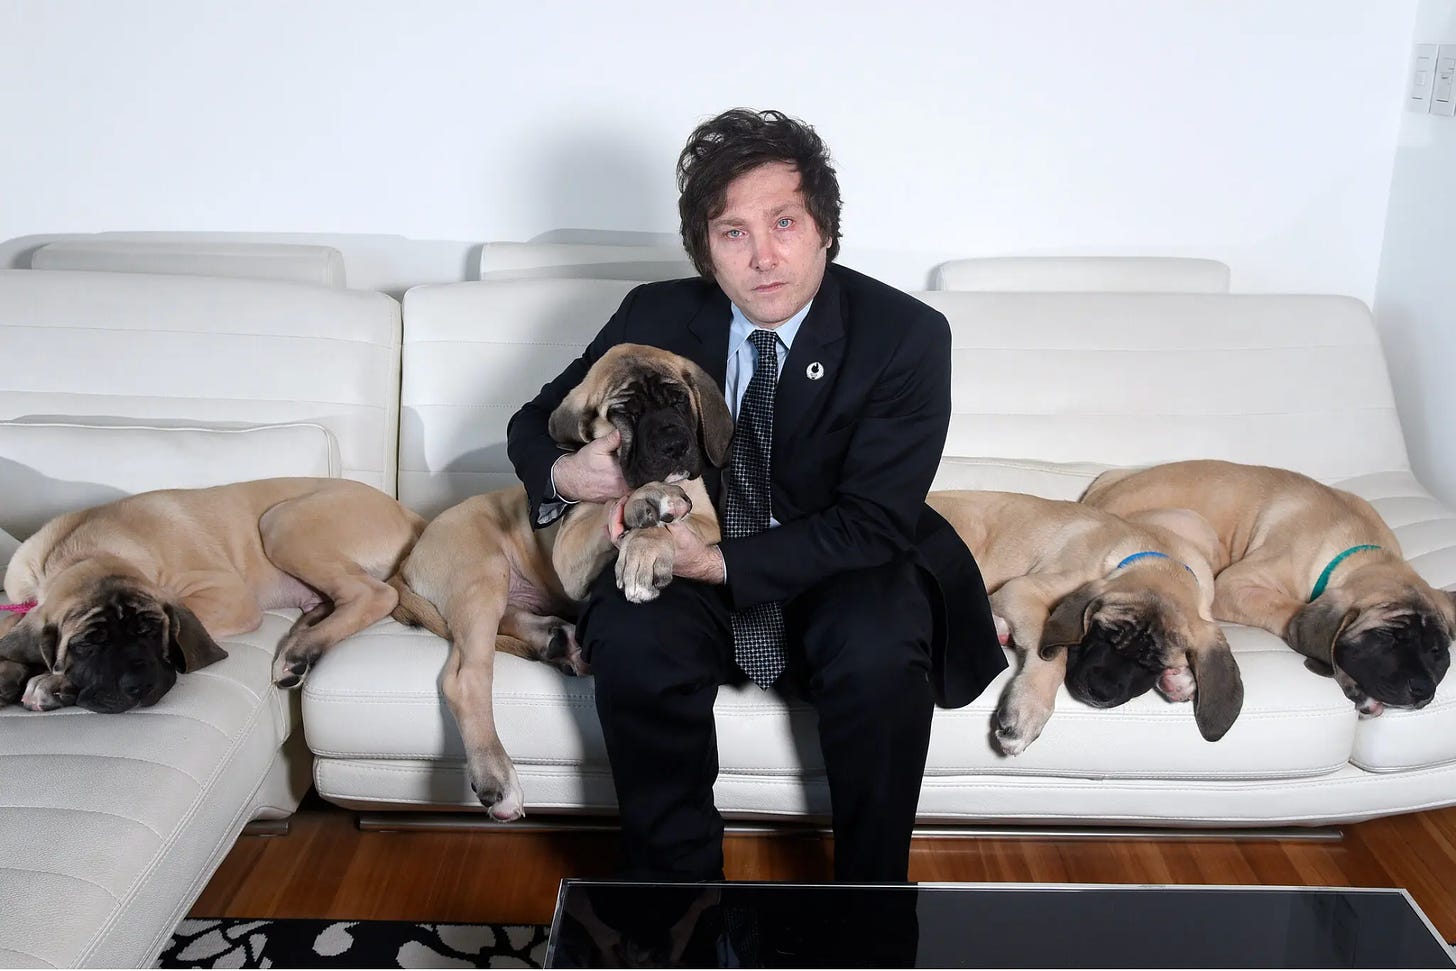 Javier Milei sits in the center of a white leather couch surrounded by 4 tan puppies, probably 6 or so months old. He is looking at the camera holding one of them and he is pale and his eyes seem kind of bloodshot. It's creepy.